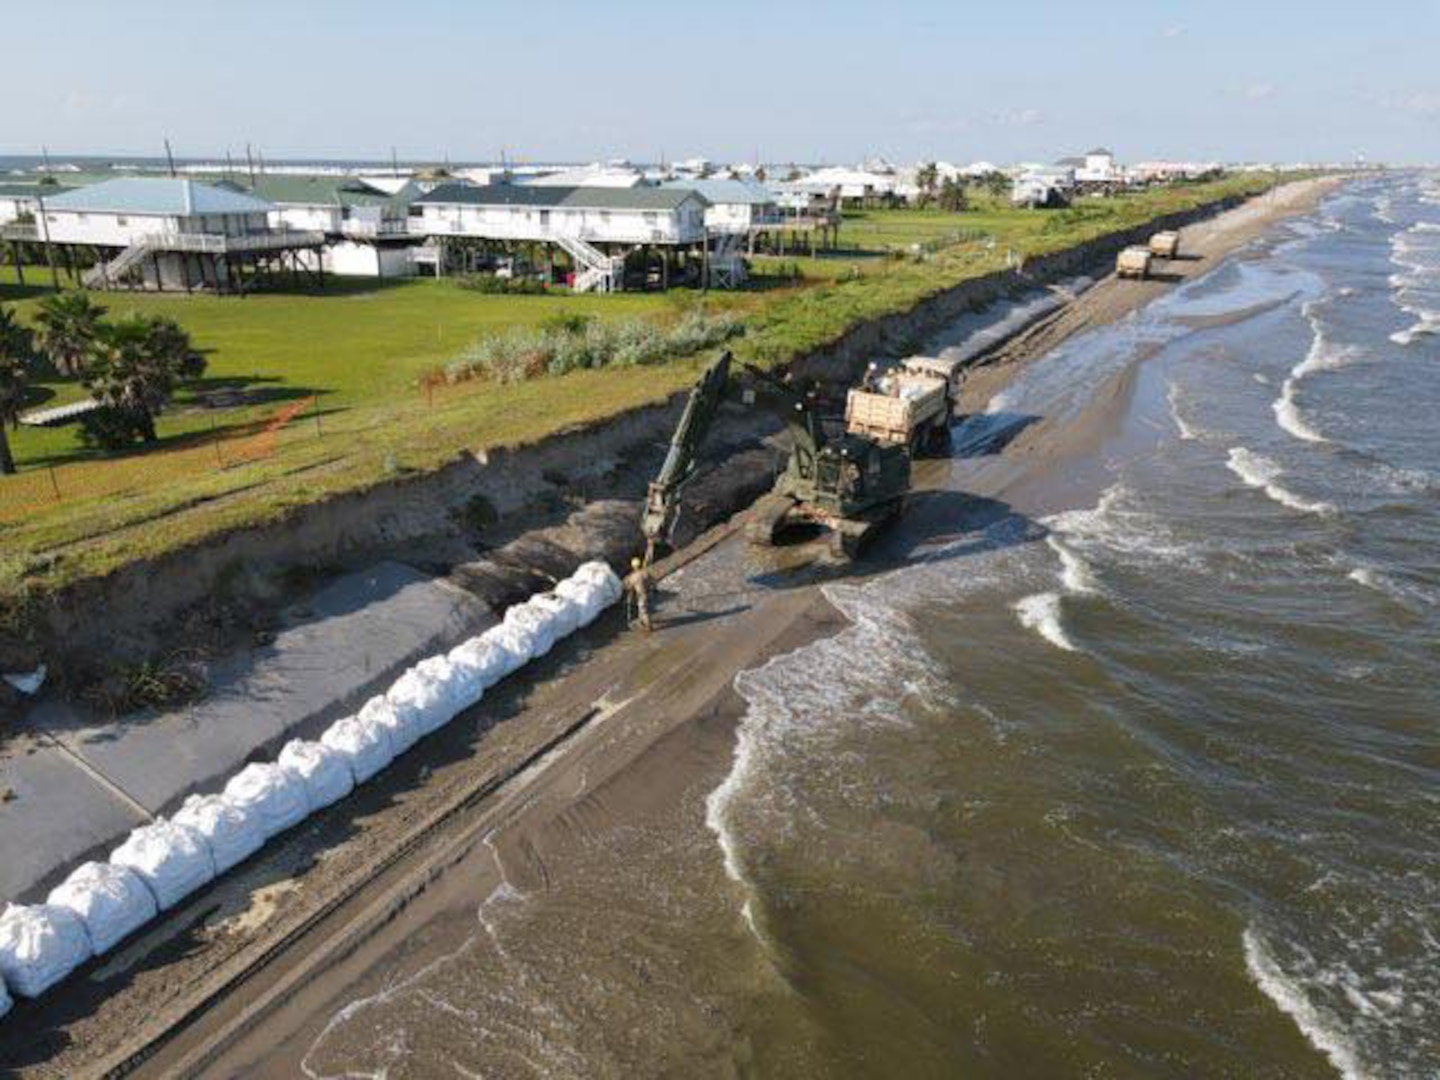 Members of the Louisiana National Guard's 843rd Engineer Company help local and state agencies reinforce the exposed burrito levee in Grand Isle before Tropical Storm Marco and Hurricane Laura. The hurricane was scheduled to make landfall Aug. 26-27, 2020.